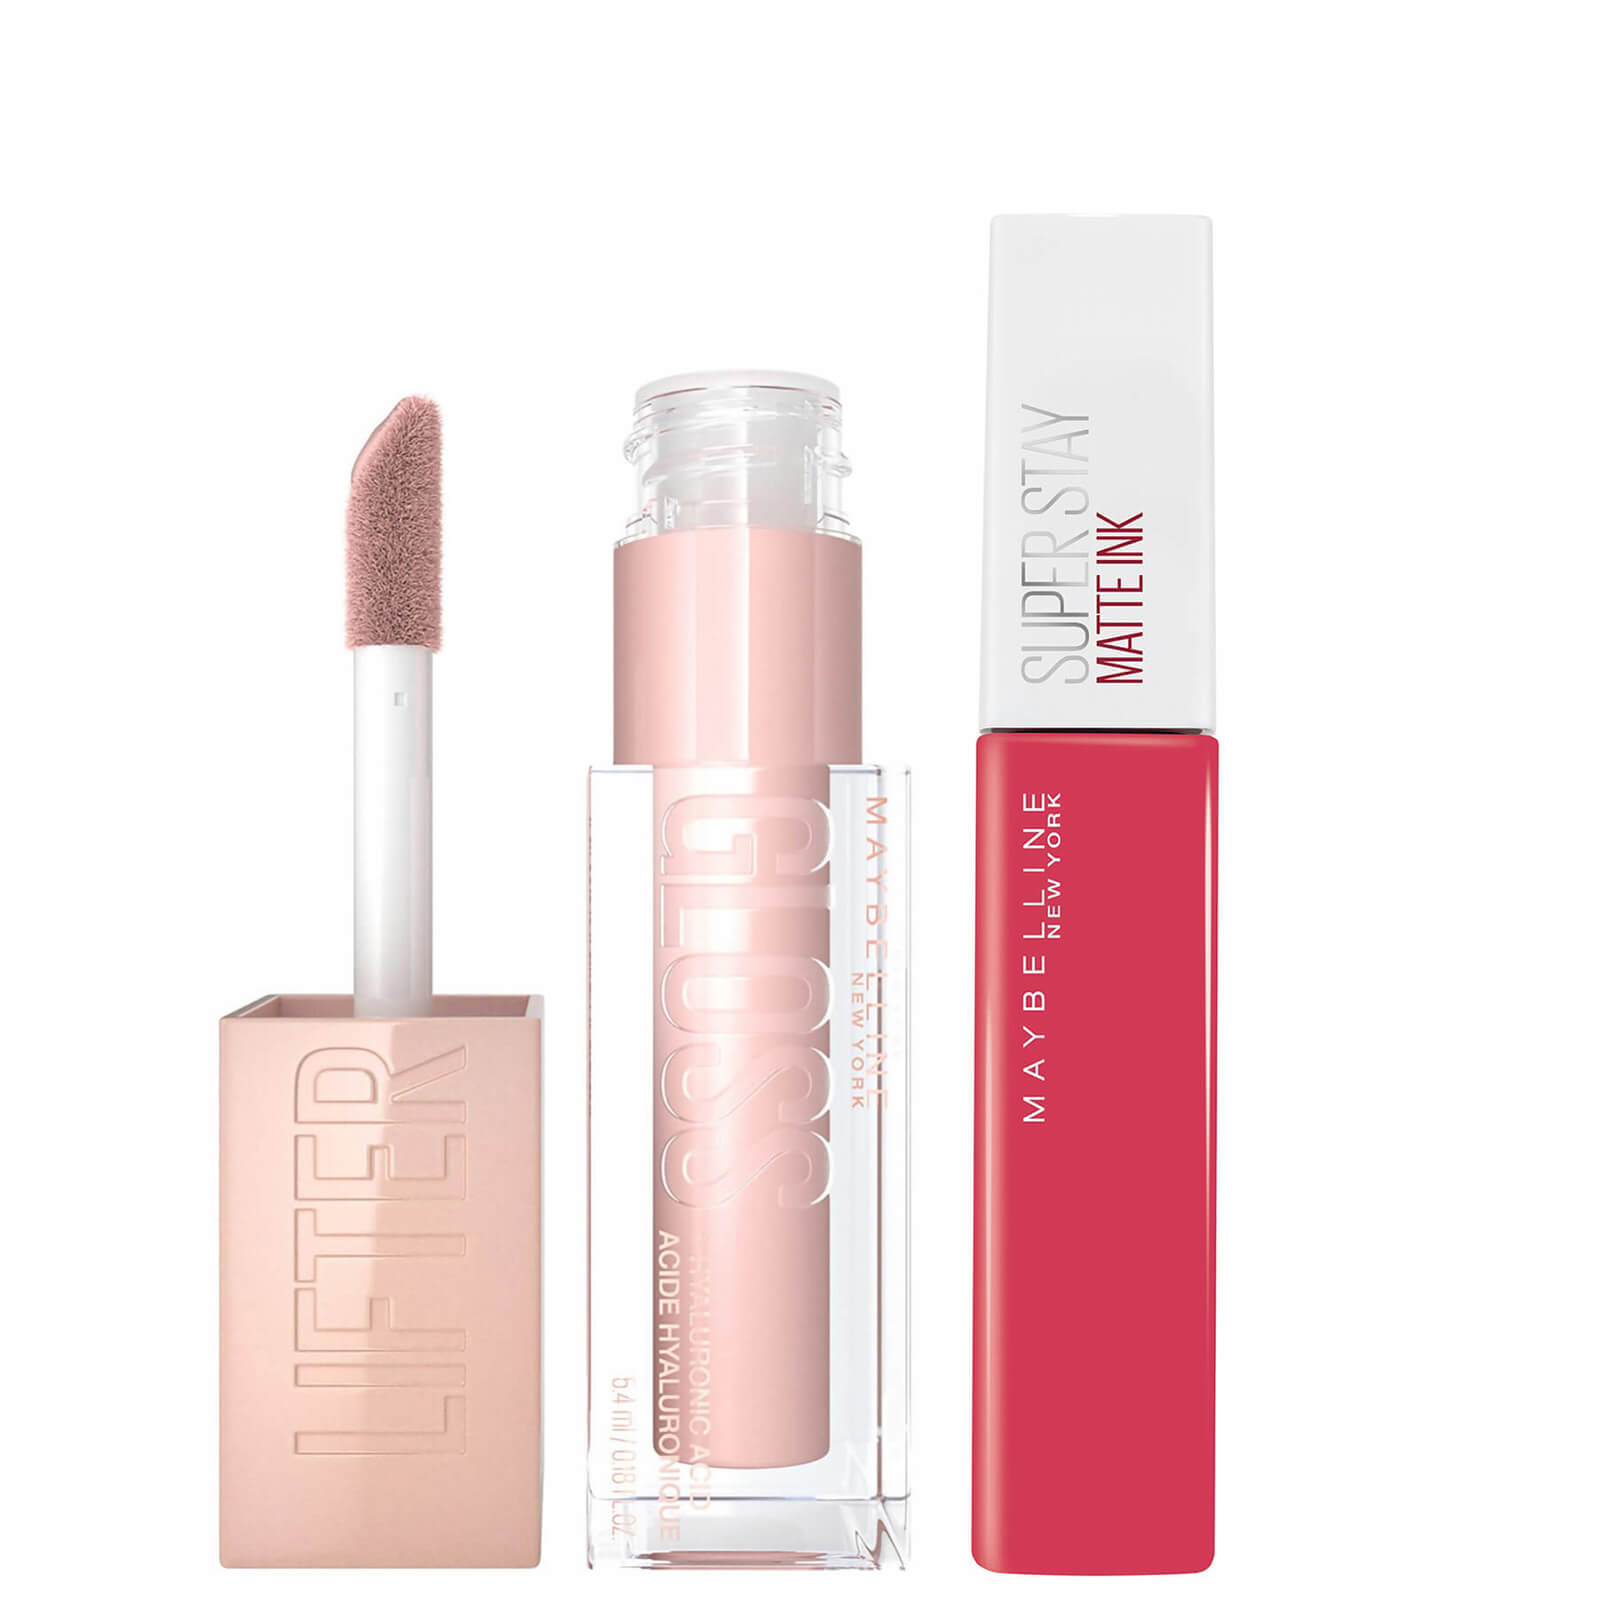 Maybelline Lifter Gloss and Superstay Matte Ink Lipstick Bundle (Various Shades) – 80 Ruler lookfantastic.com imagine